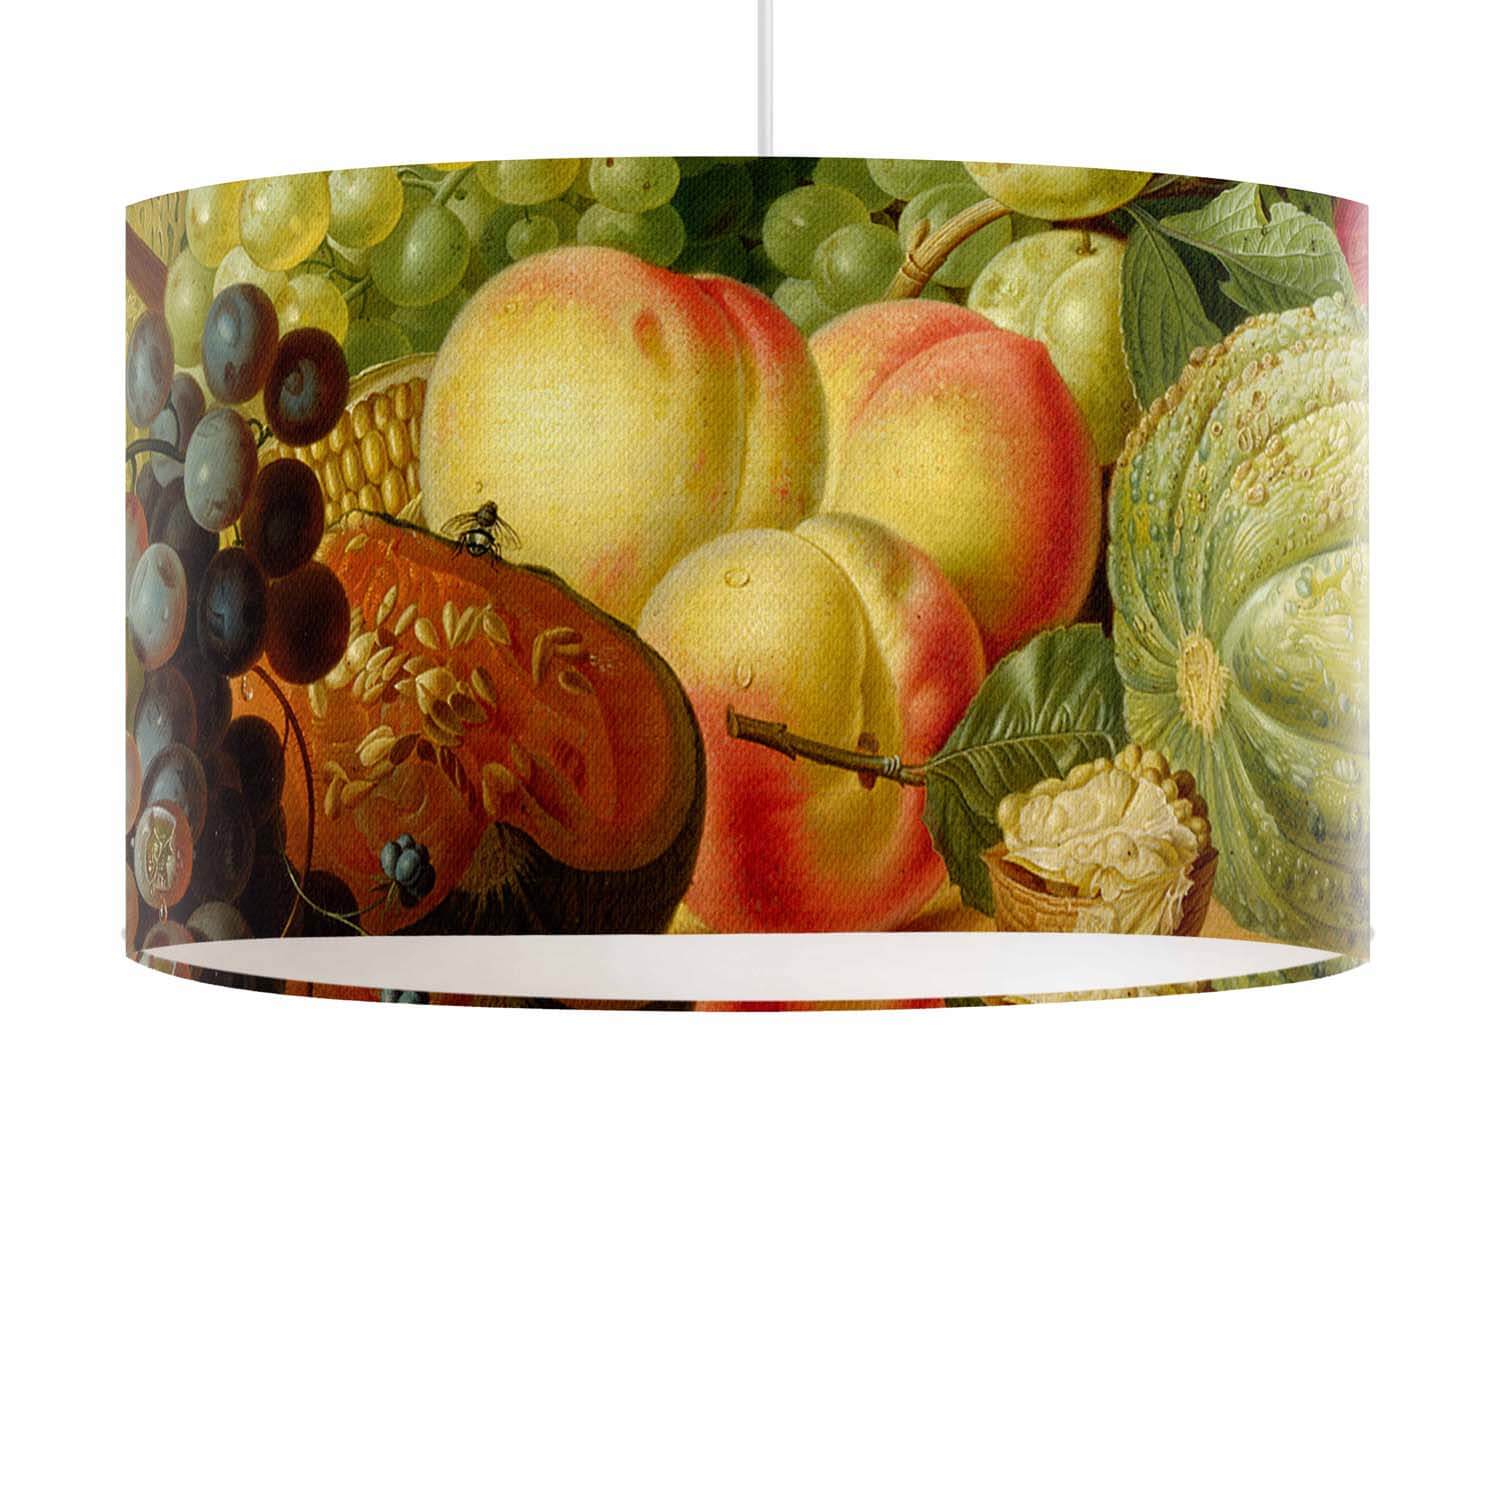 Fruit and Flowers - National Gallery Art Lampshade